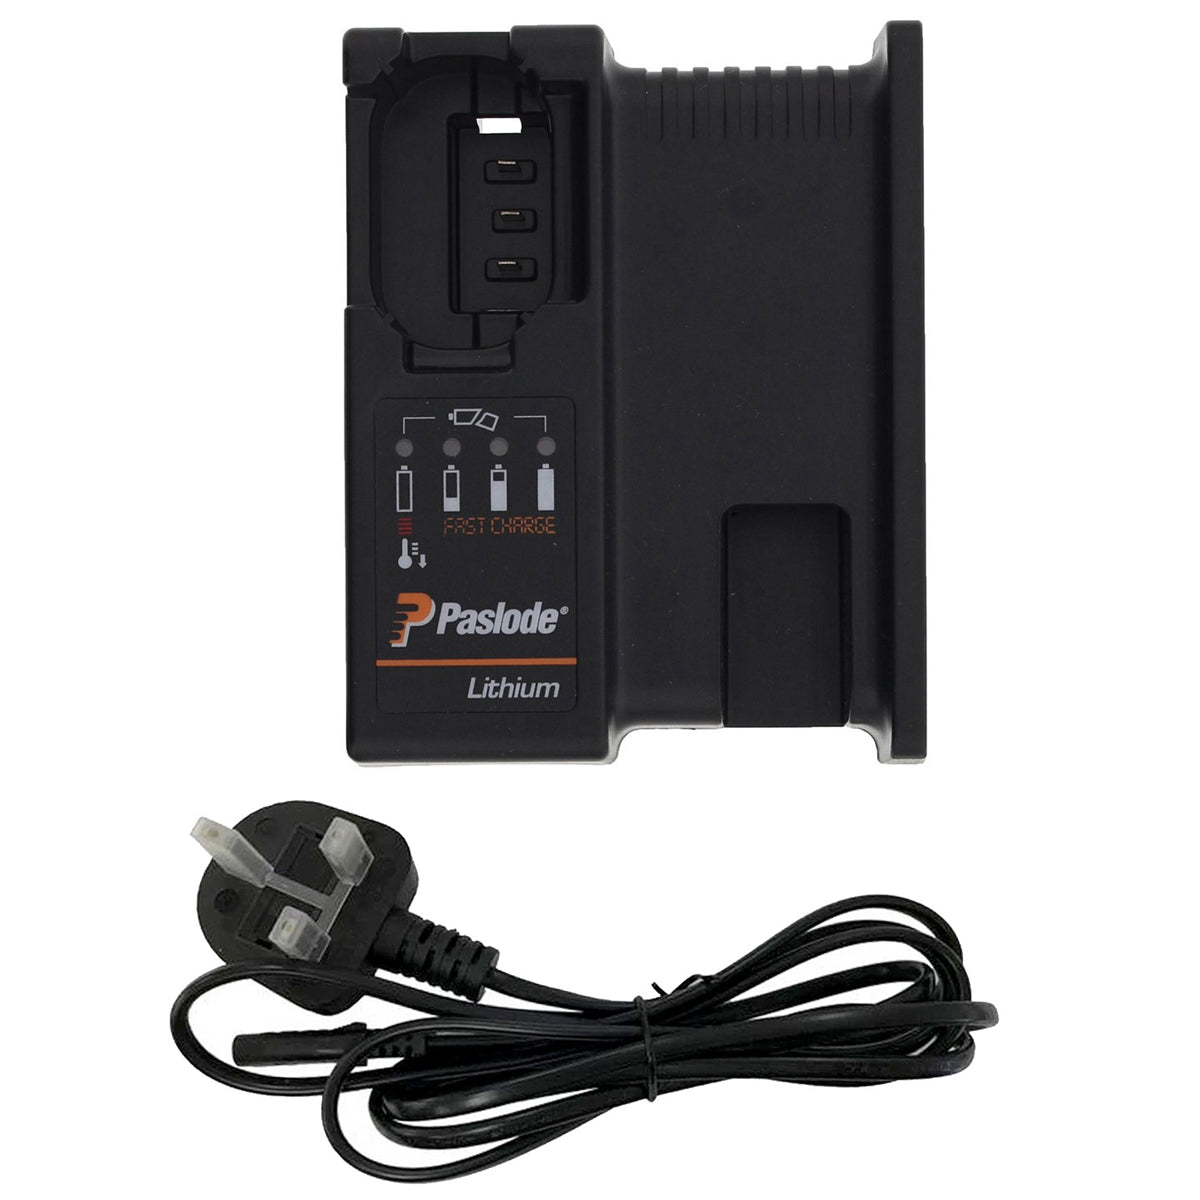 Paslode 018882 7.4V Lithium Battery Charger with AC/DC Adaptor for IM65 IM65A PPN35Ci IM360Ci